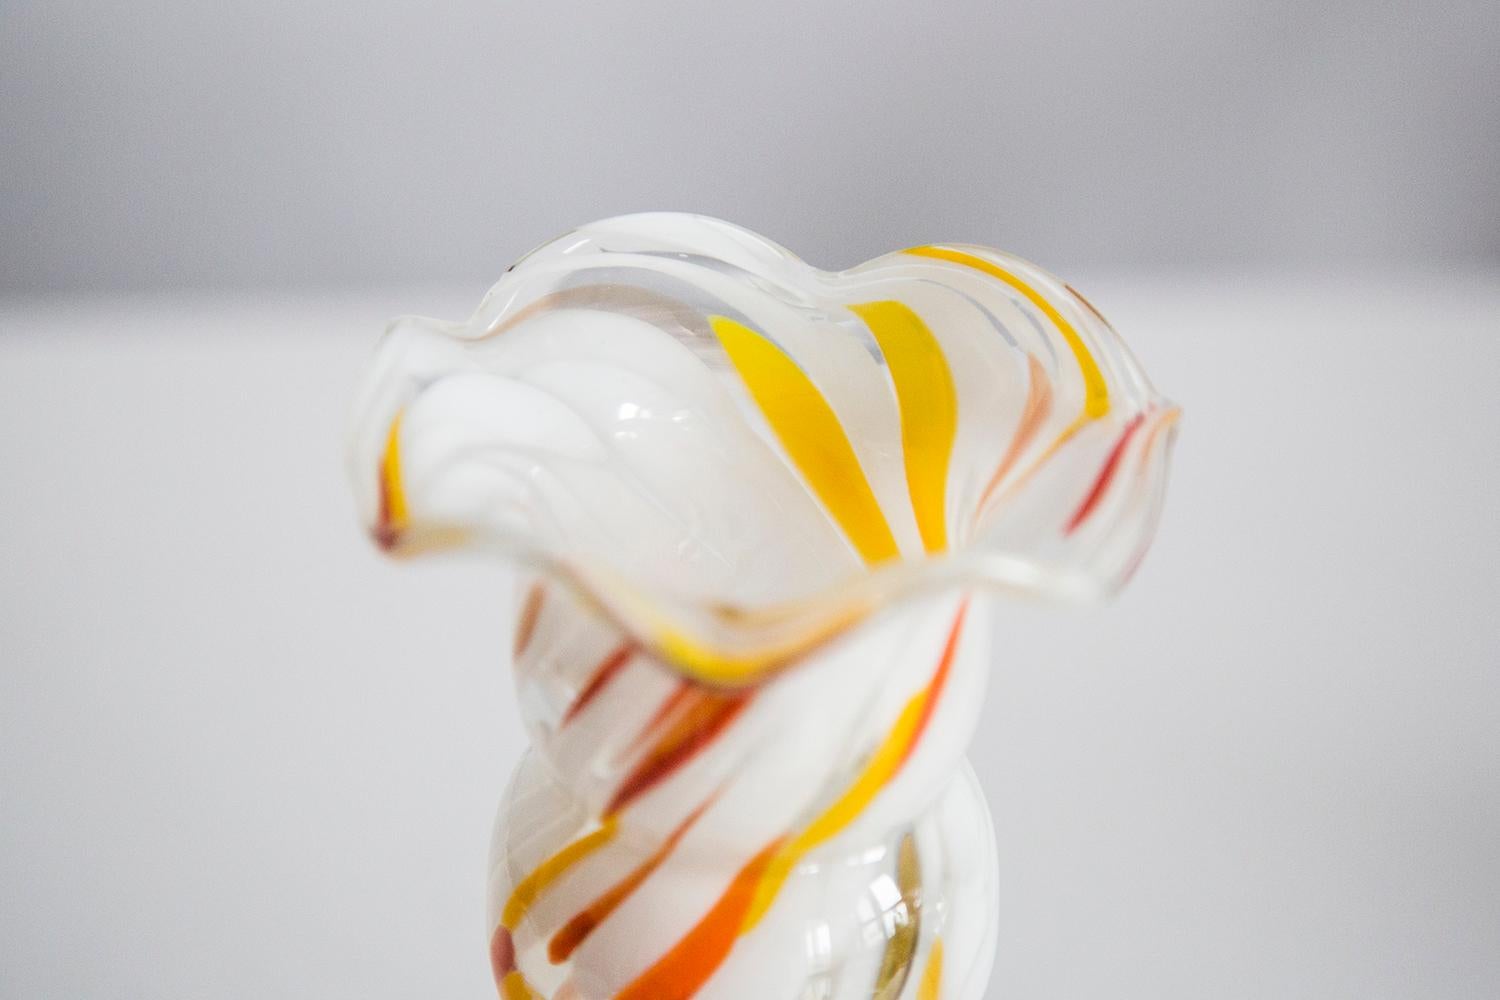 Mid Century Vintage Artistic Glass Orange and White Vase, Europe, 1970s For Sale 5